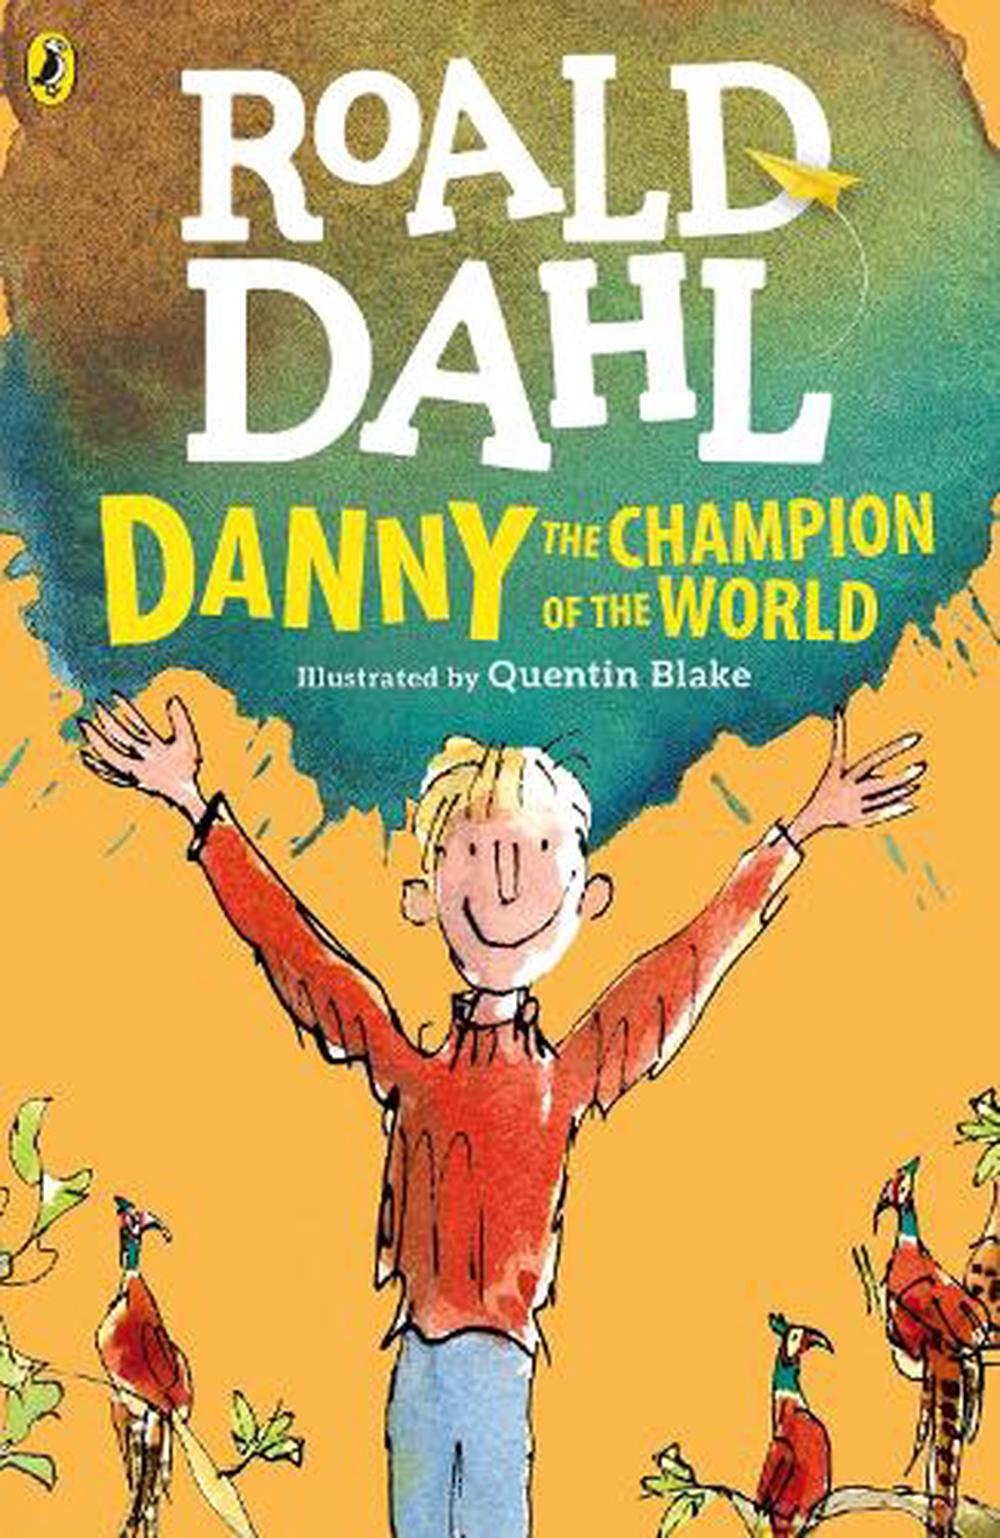 Danny The Champion Of The World By Roald Dahl Paperback Book Free Shipping 9780141365411 Ebay